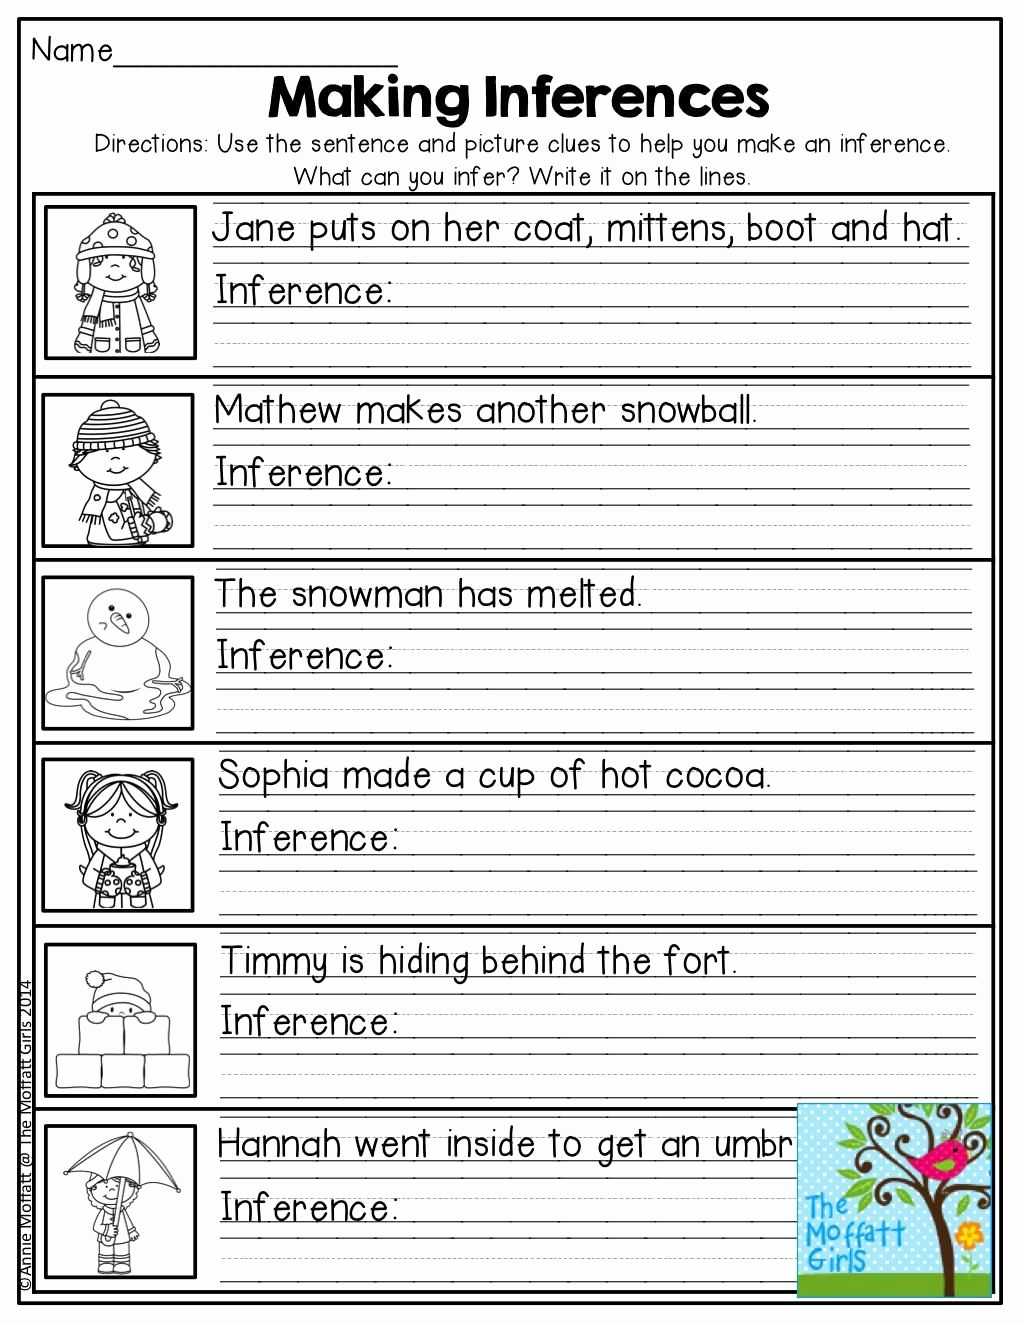 Middle School Inference Worksheets Inspirational Middle School Inference Worksheets